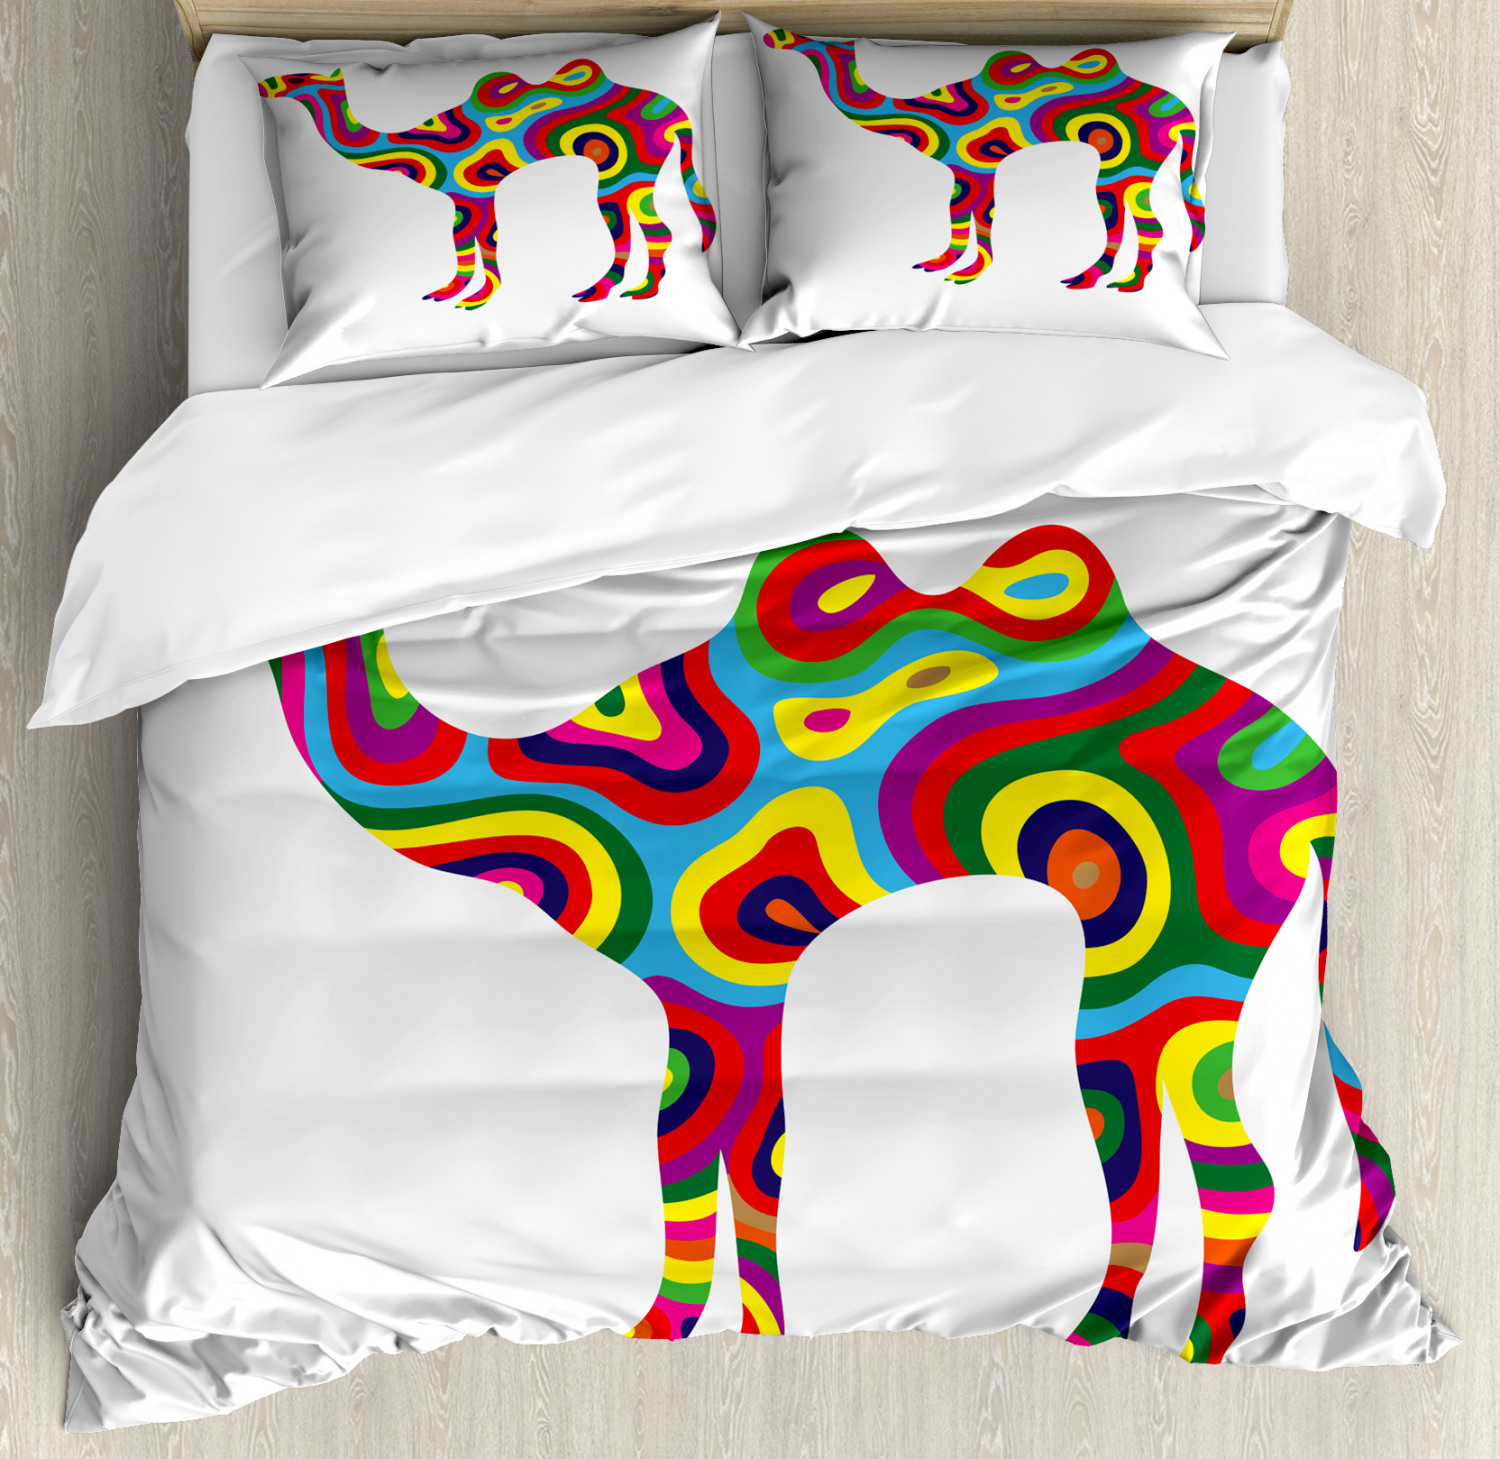 Trippy Duvet Cover Set With Pillow Shams Abstract Camel Figure